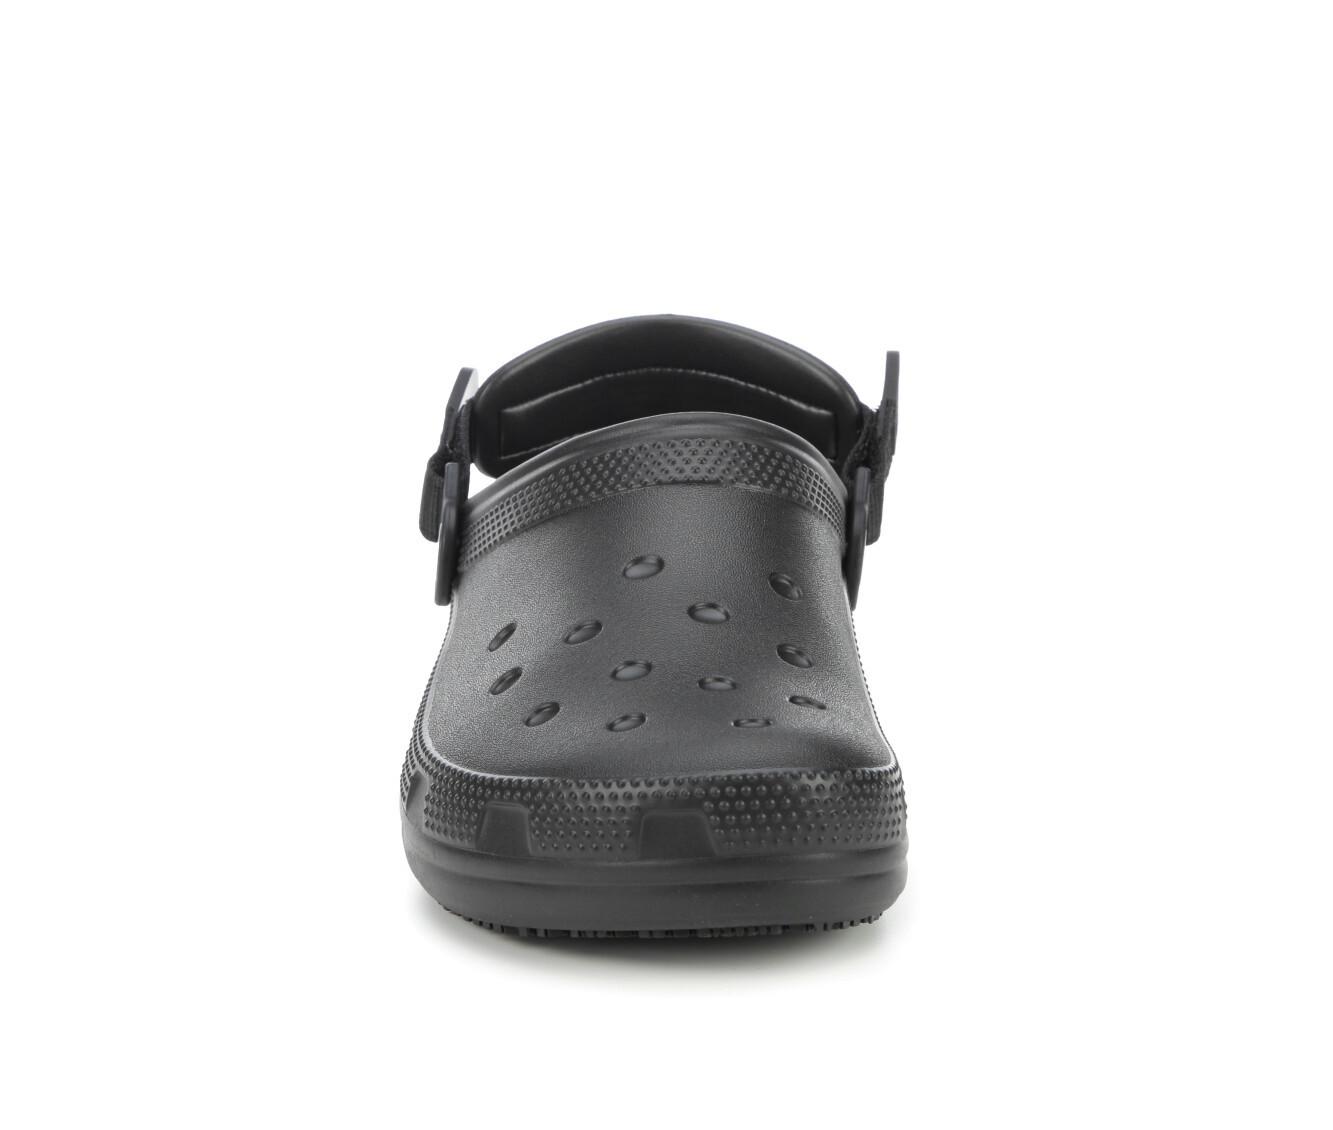 Adults' Crocs Work Classic Clog Safety Shoes